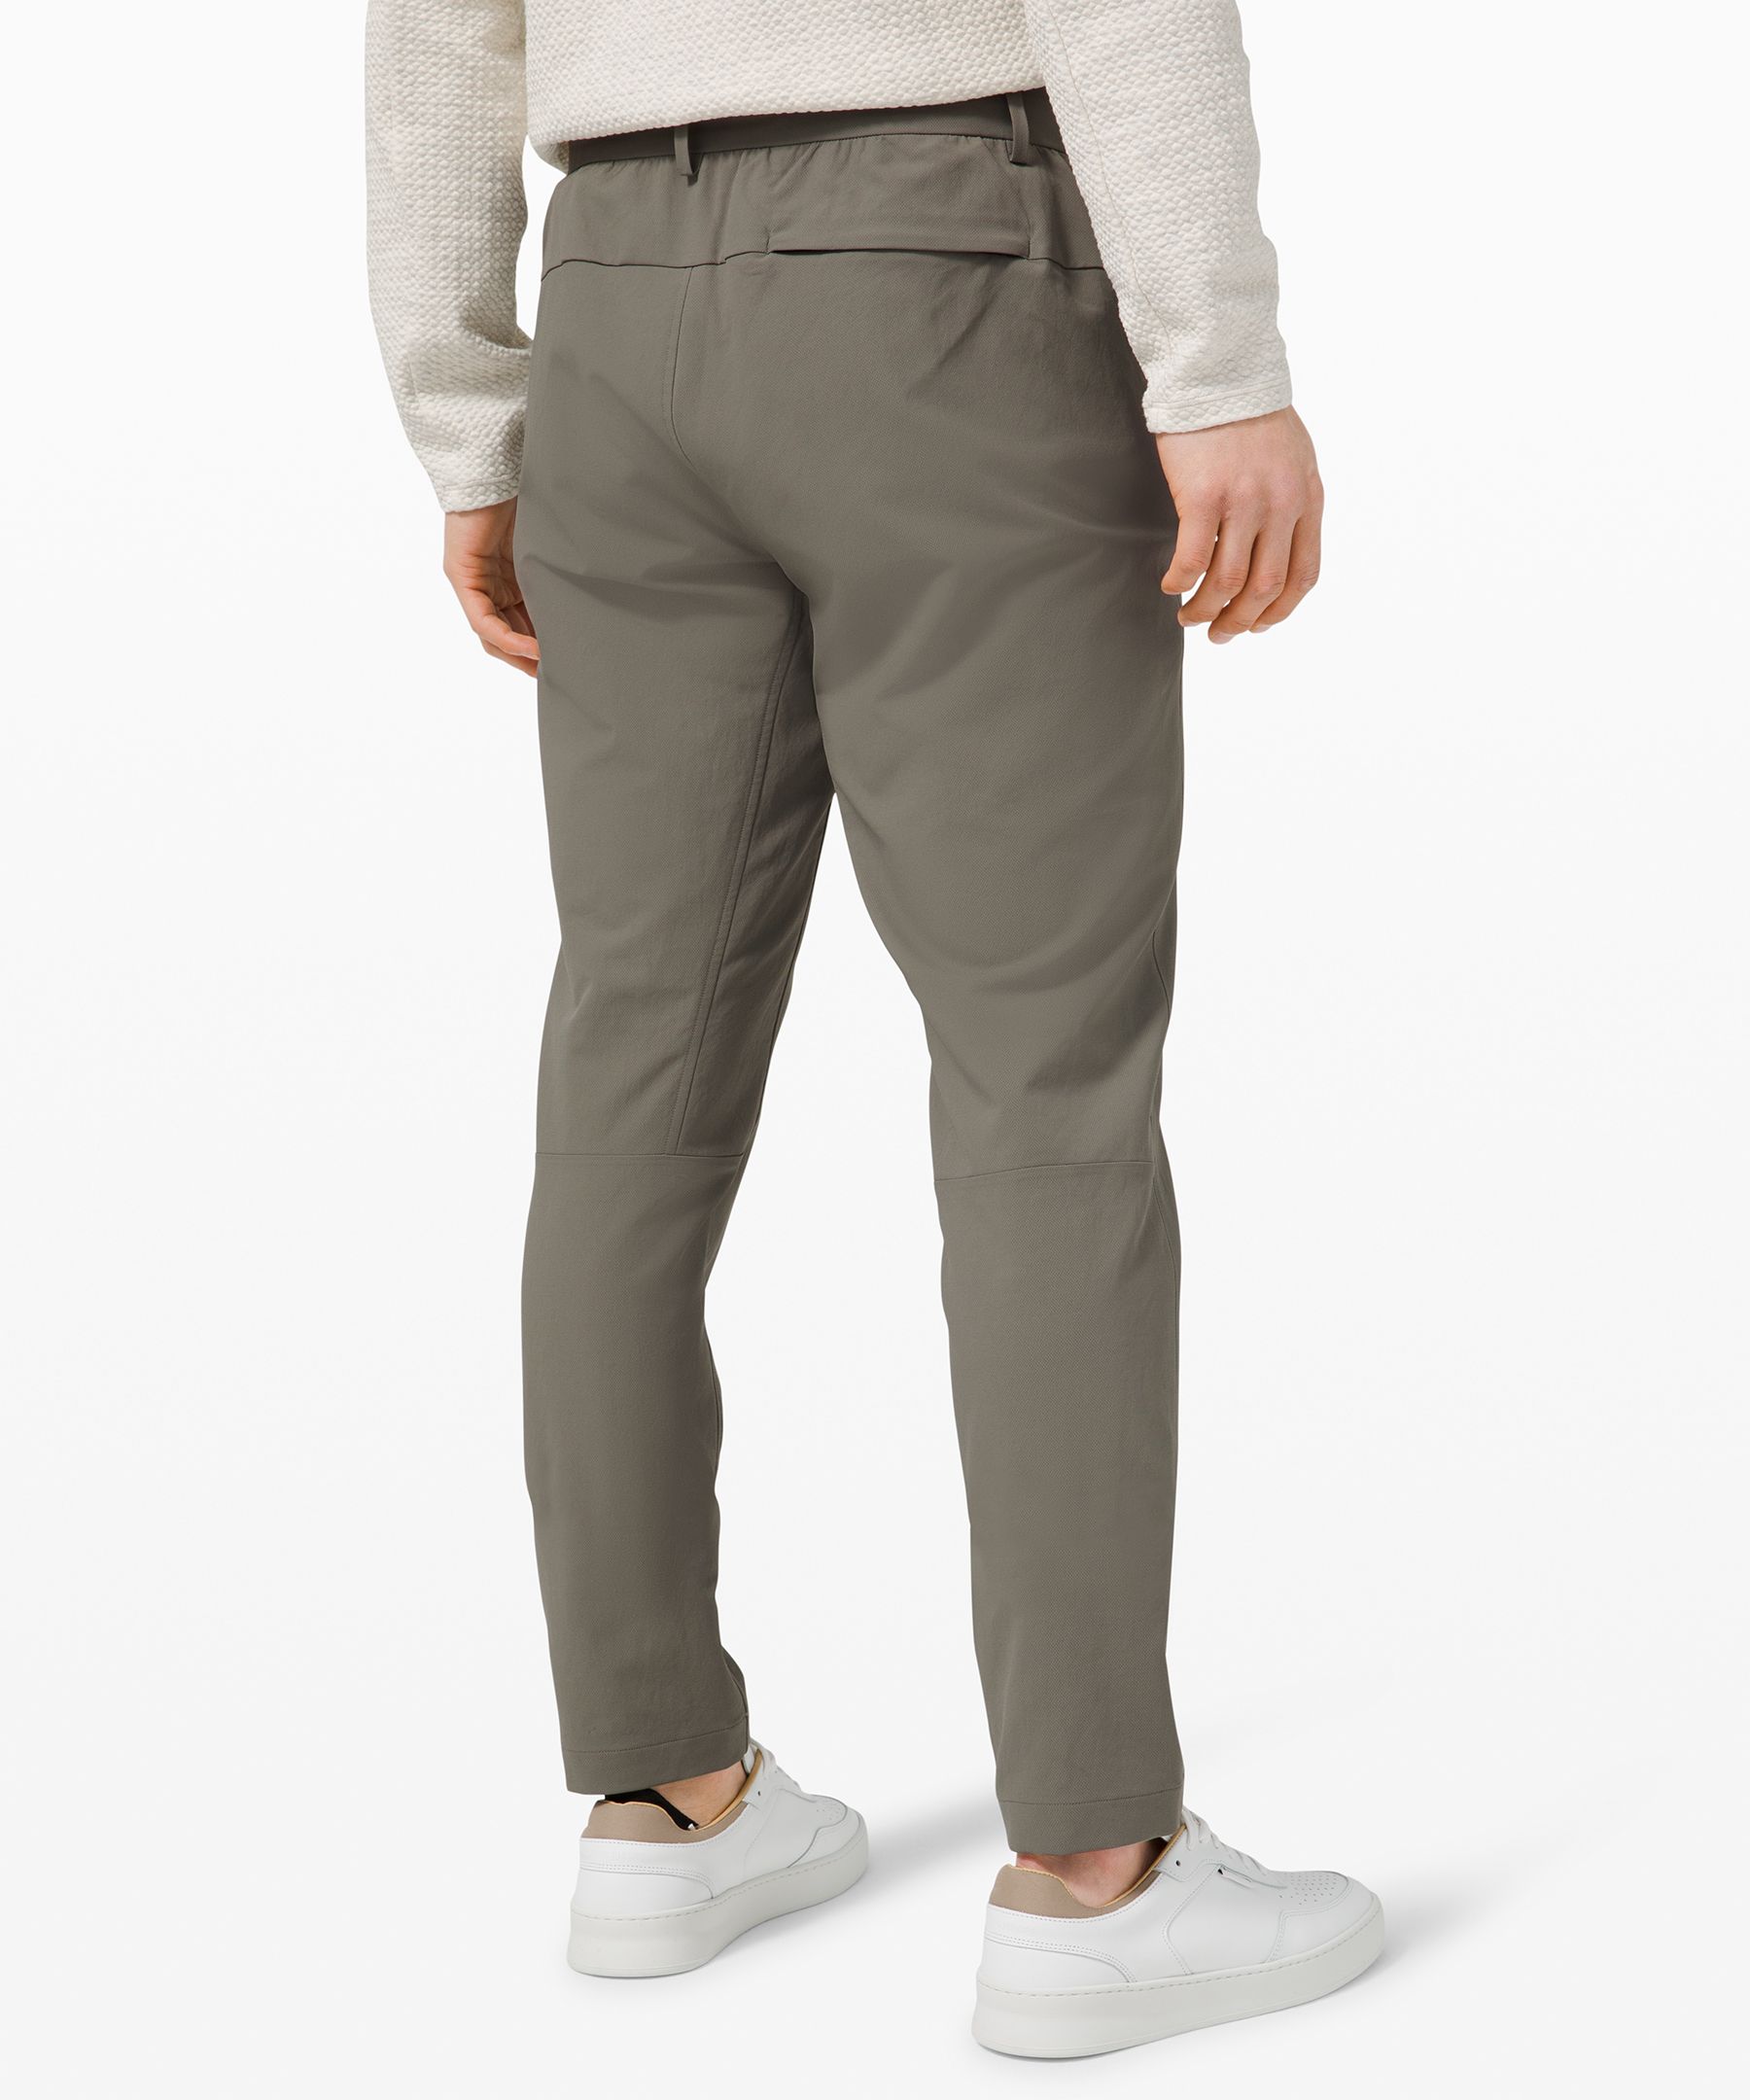 Lululemon New Venture Pant Reviewed Articles  International Society of  Precision Agriculture